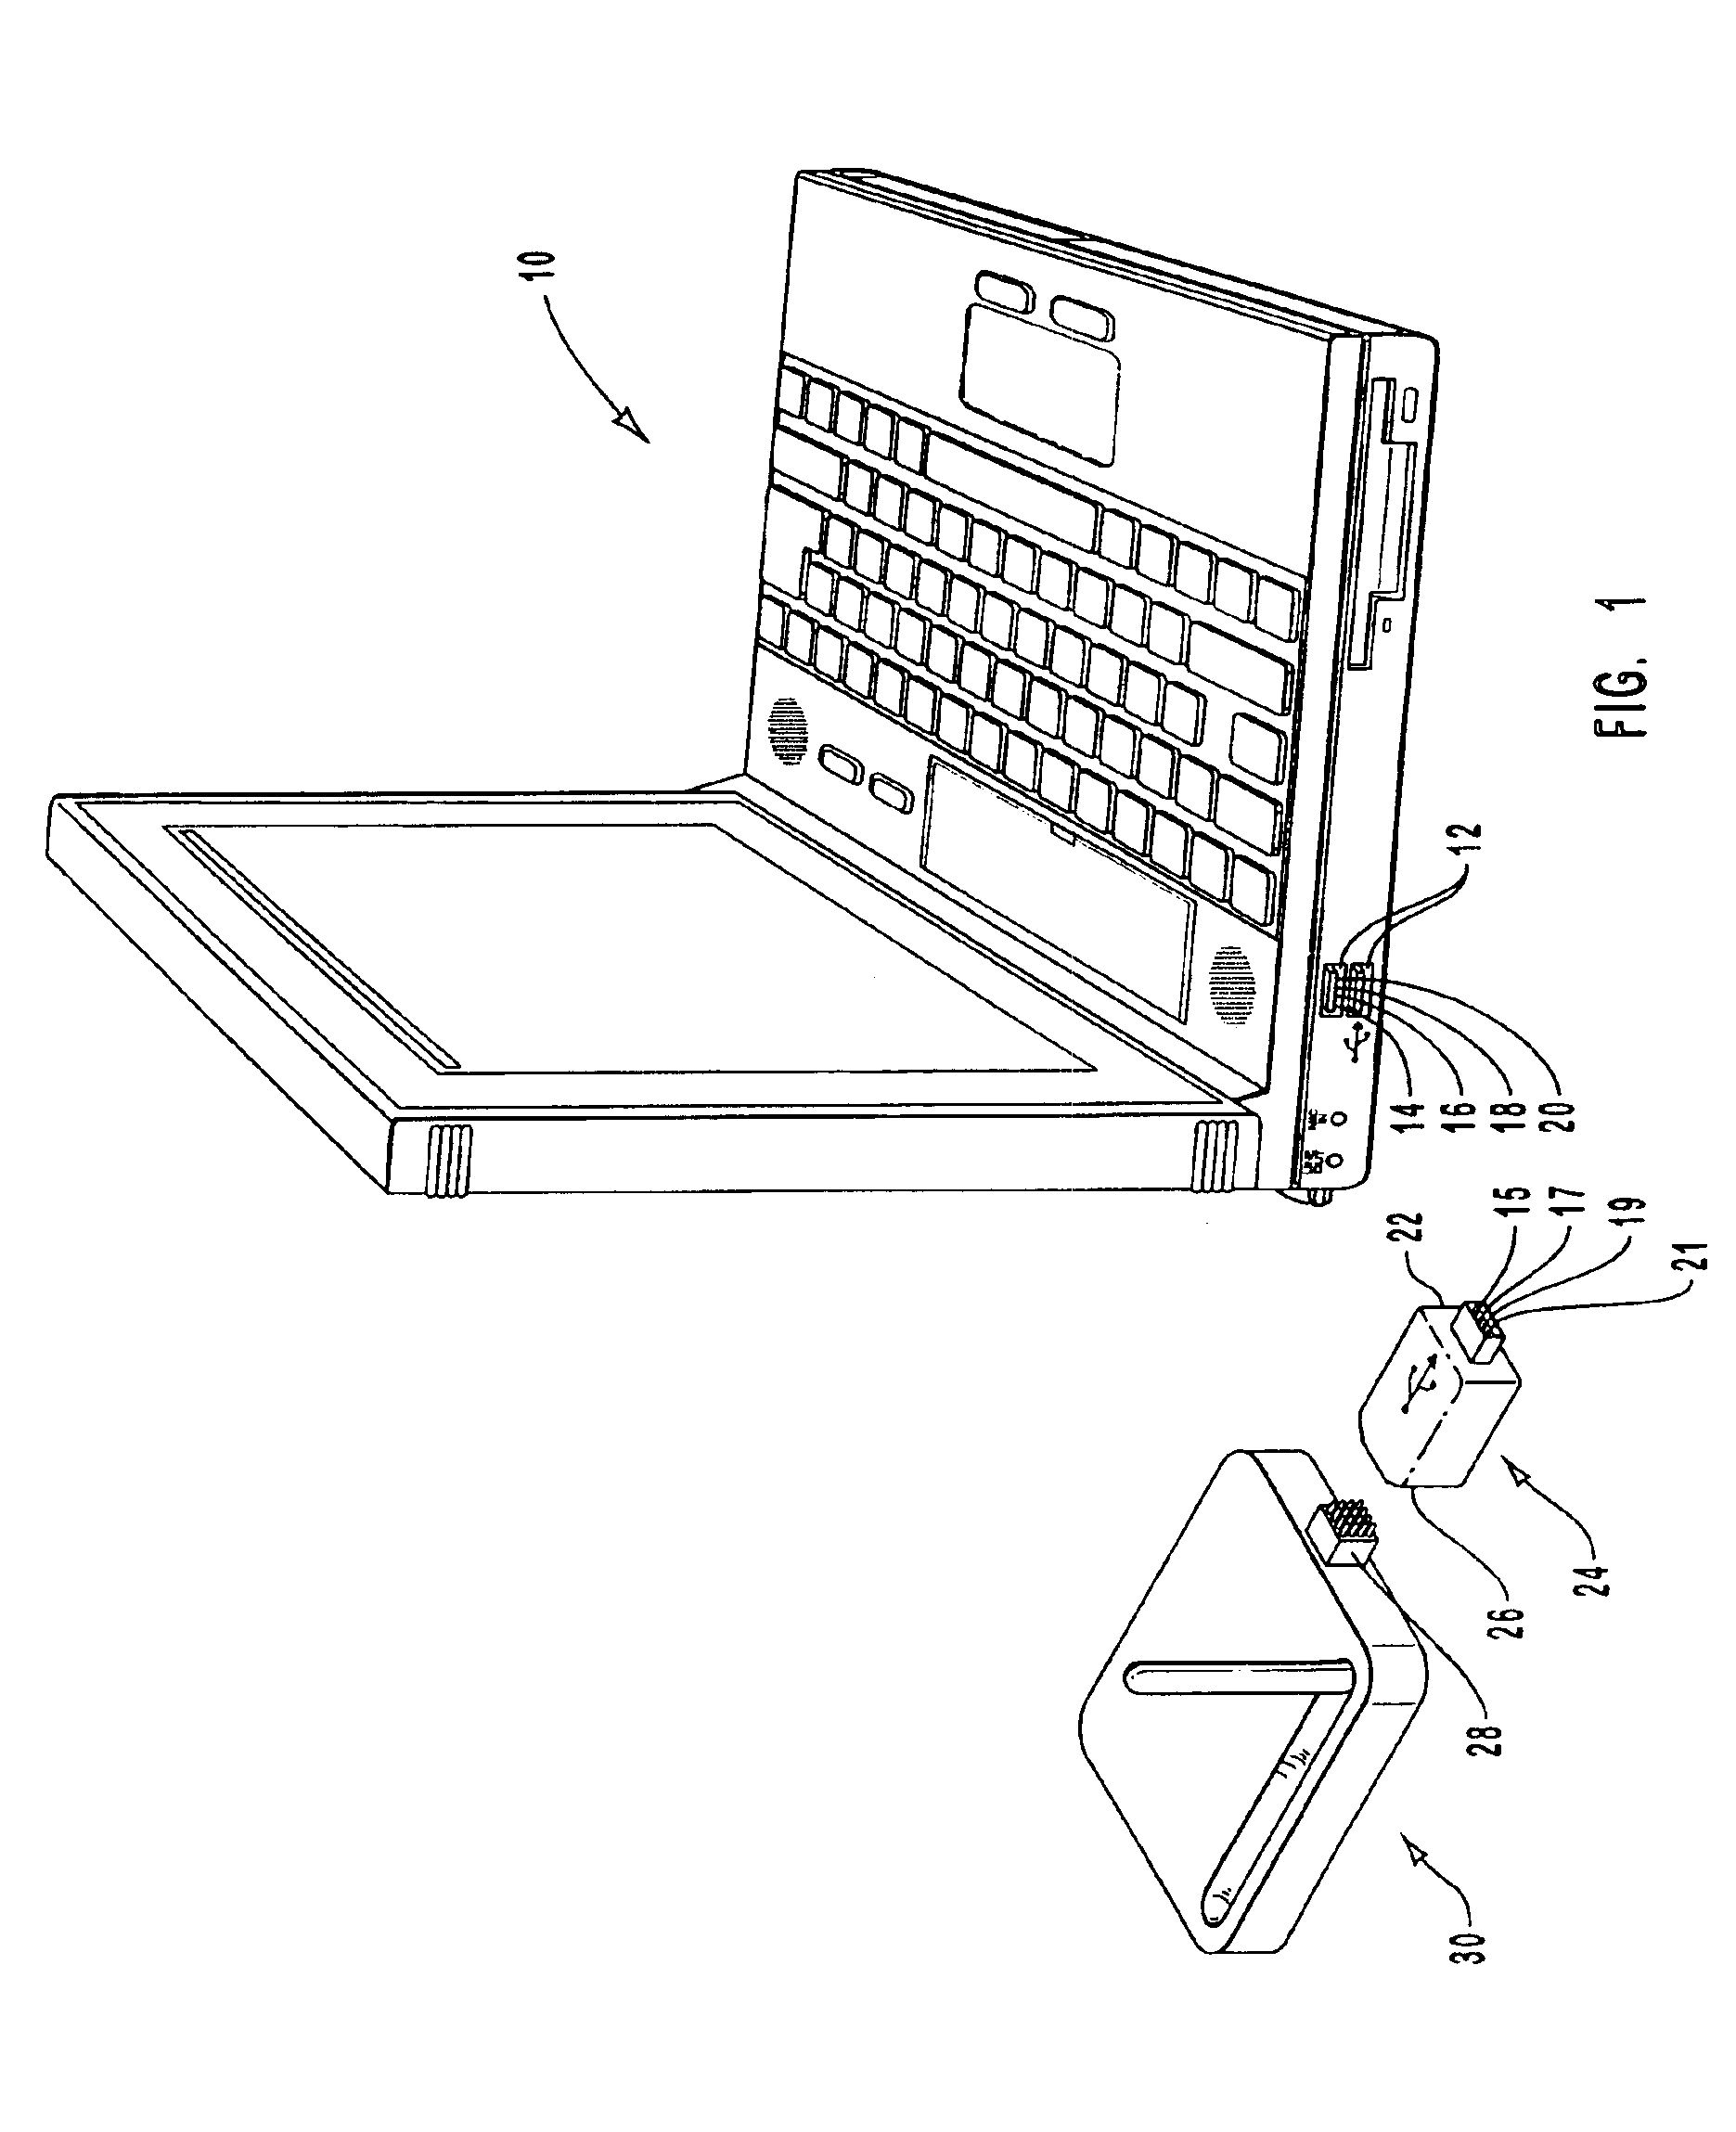 Connector scheme to allow physical orientation of a computer peripheral